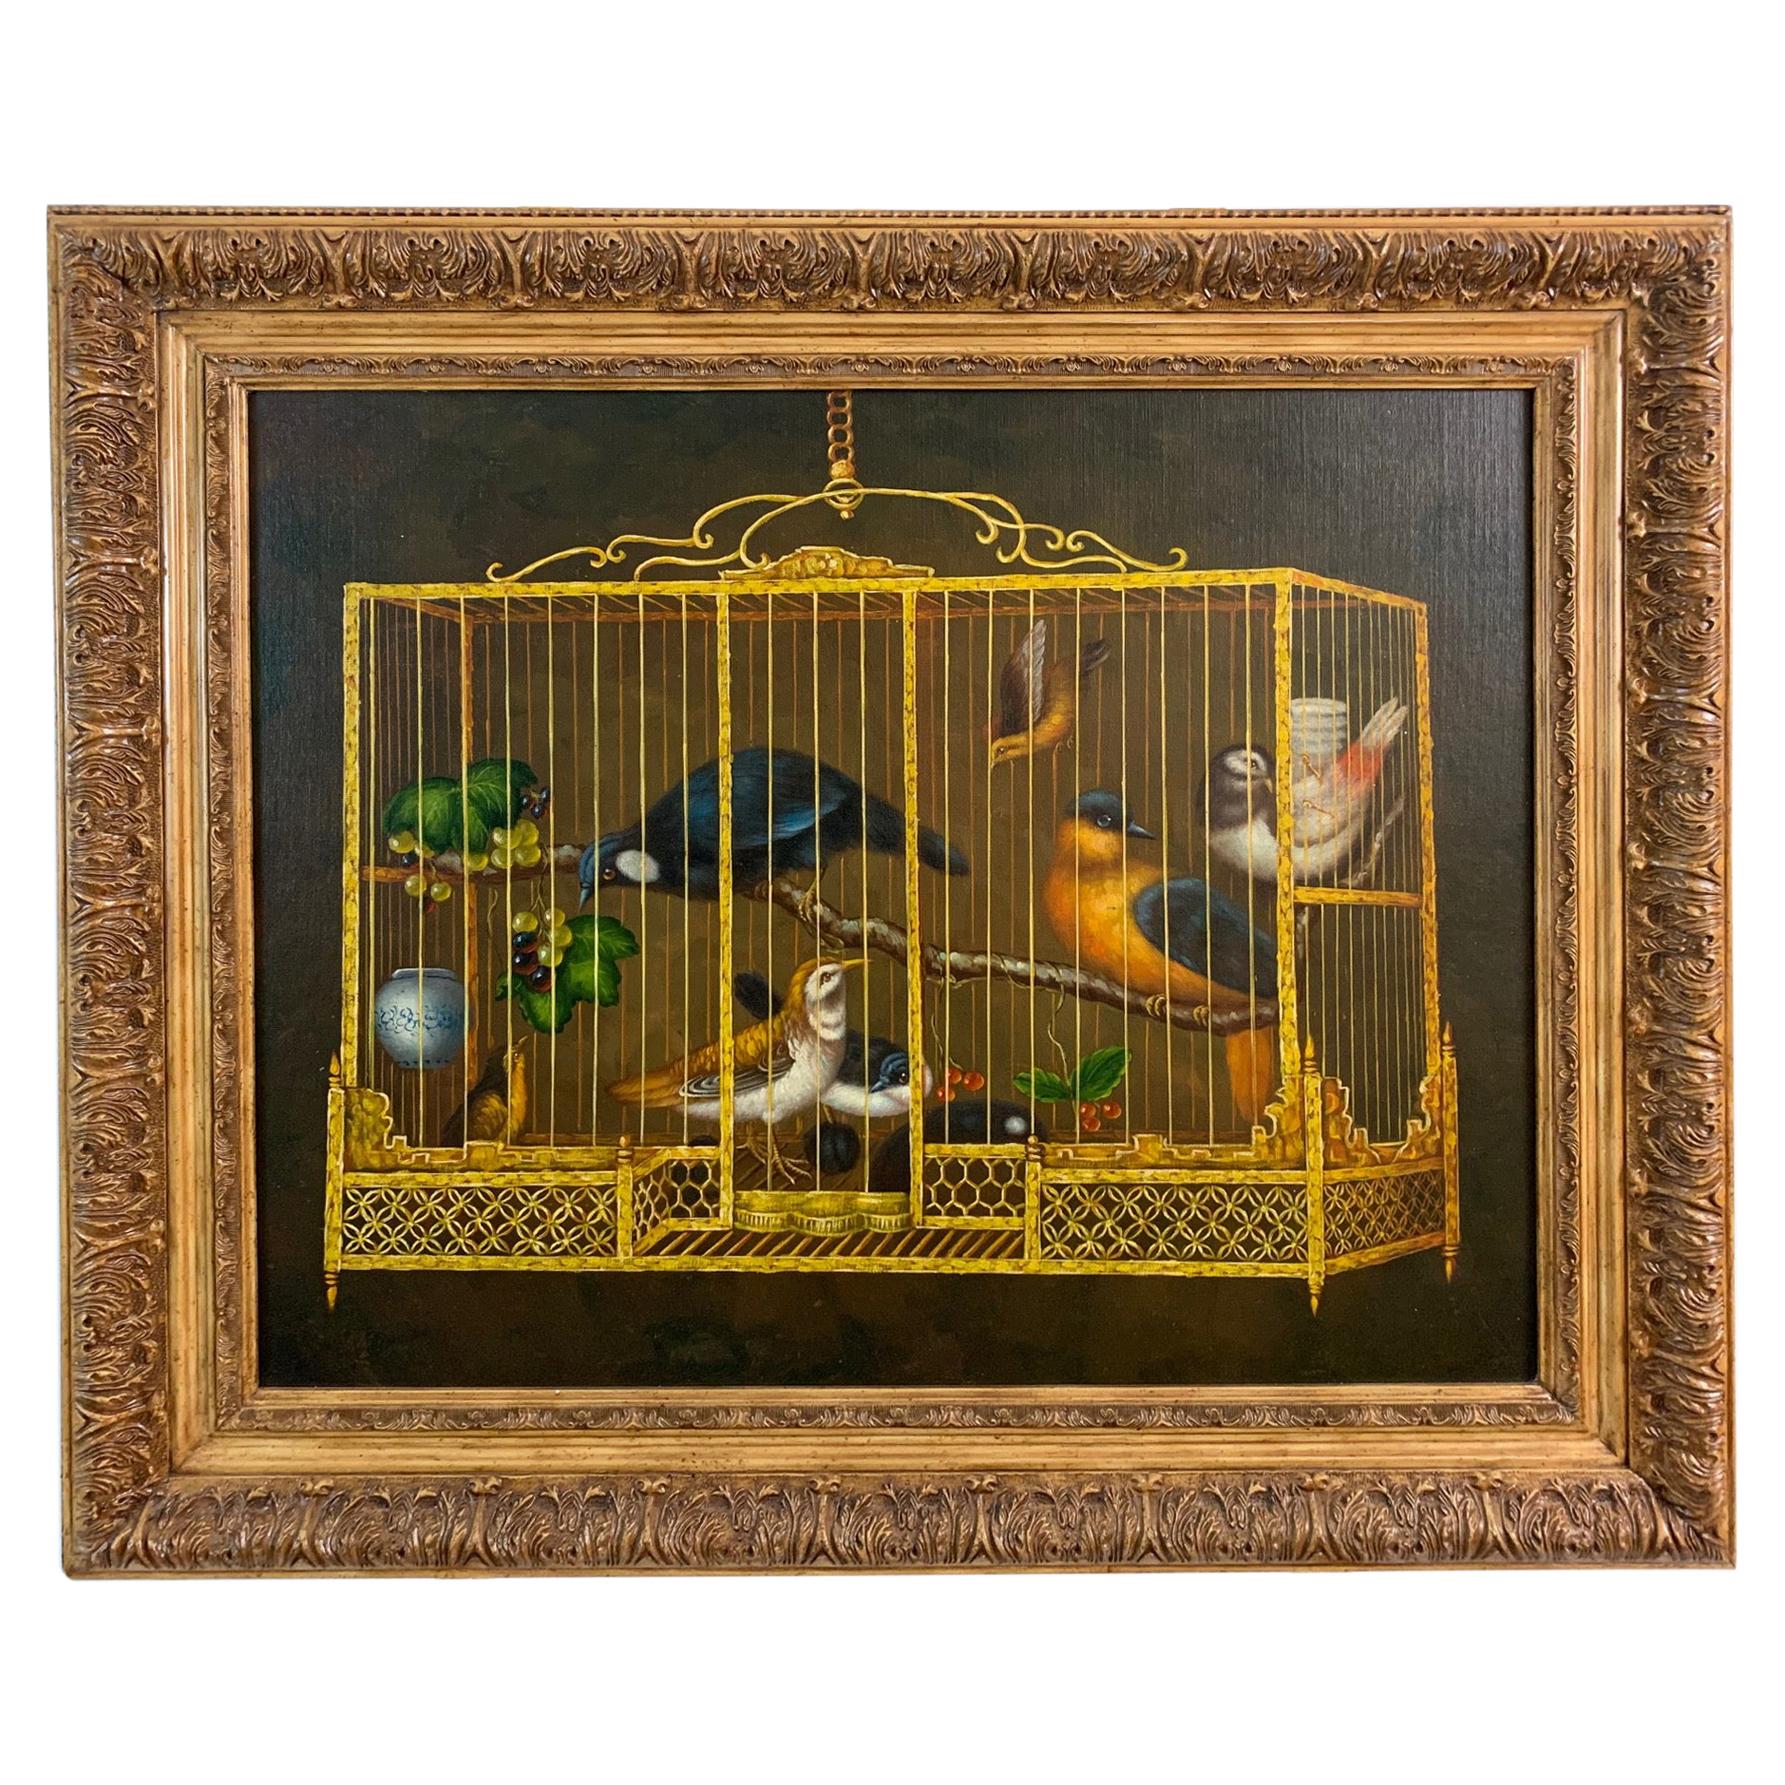 Striking Painting of Birds in Birdcage with Berries and Fruit